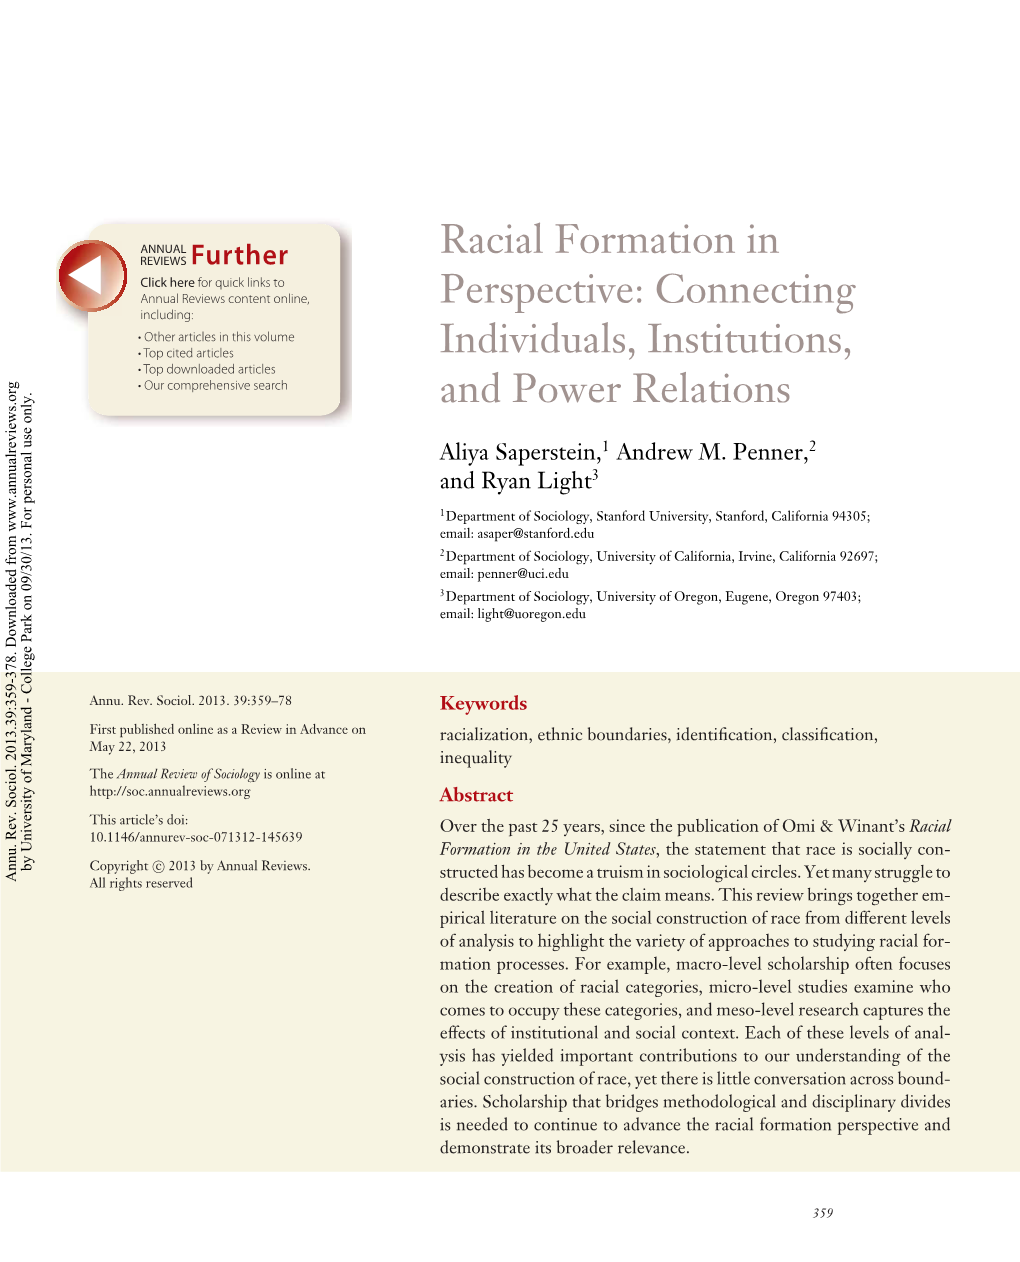 Racial Formation in Perspective: Connecting Individuals, Institutions, and Power Relations